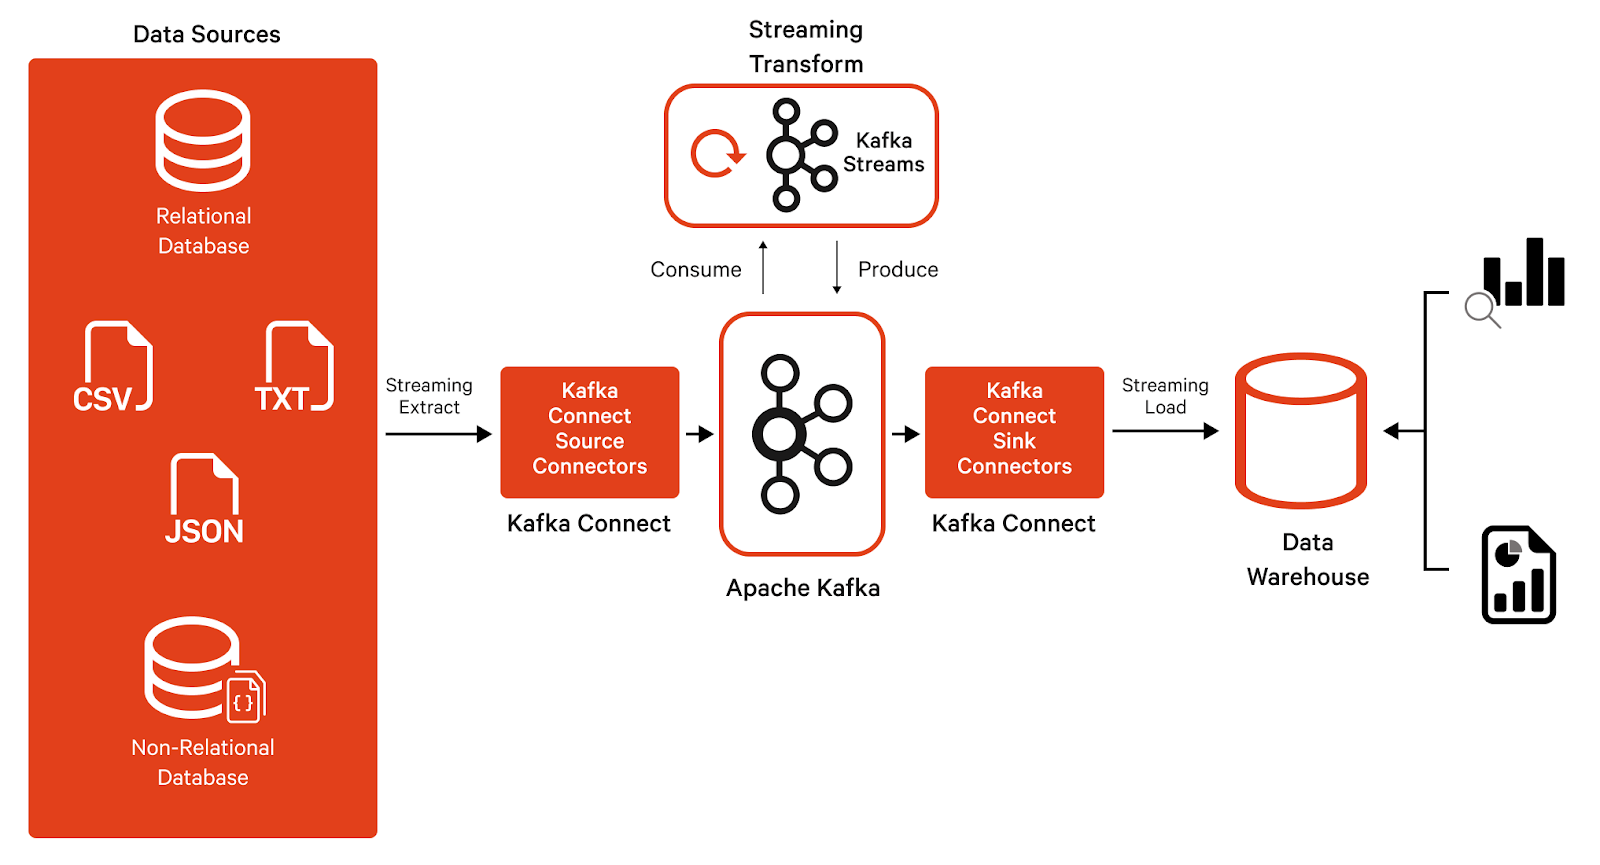 A logical overview of a streaming ETL pipeline with Kafka.